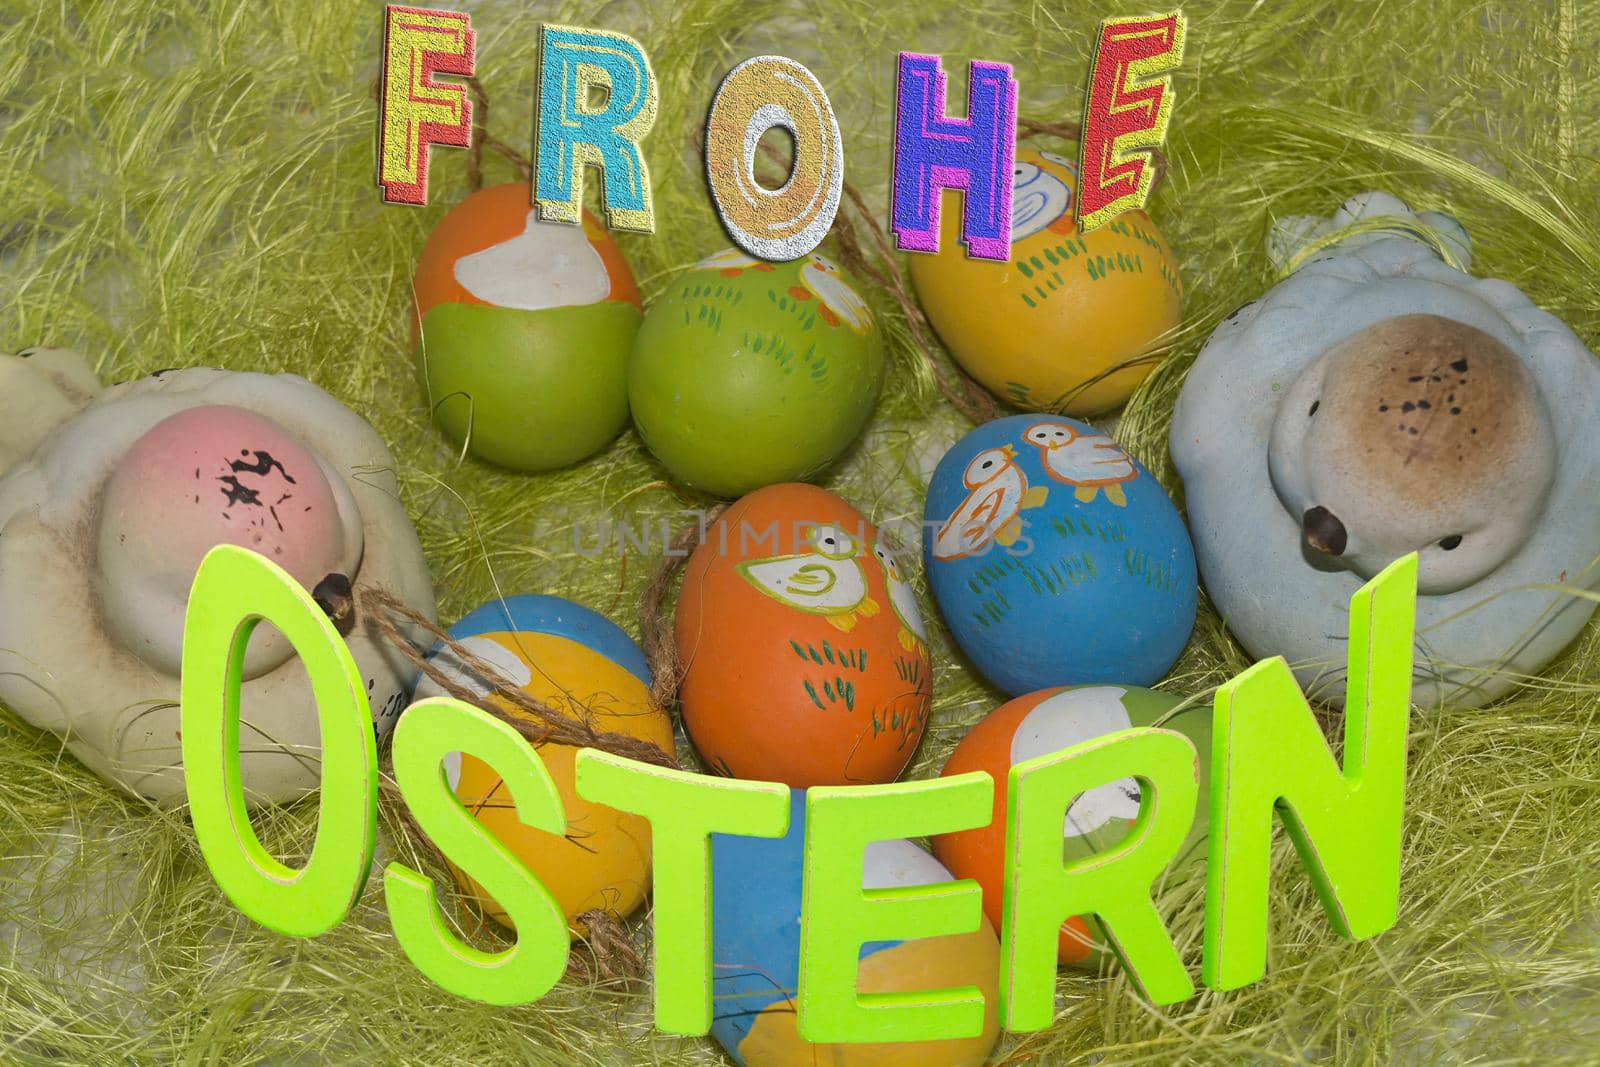 Colorful eggs in the basket on green grass  Background